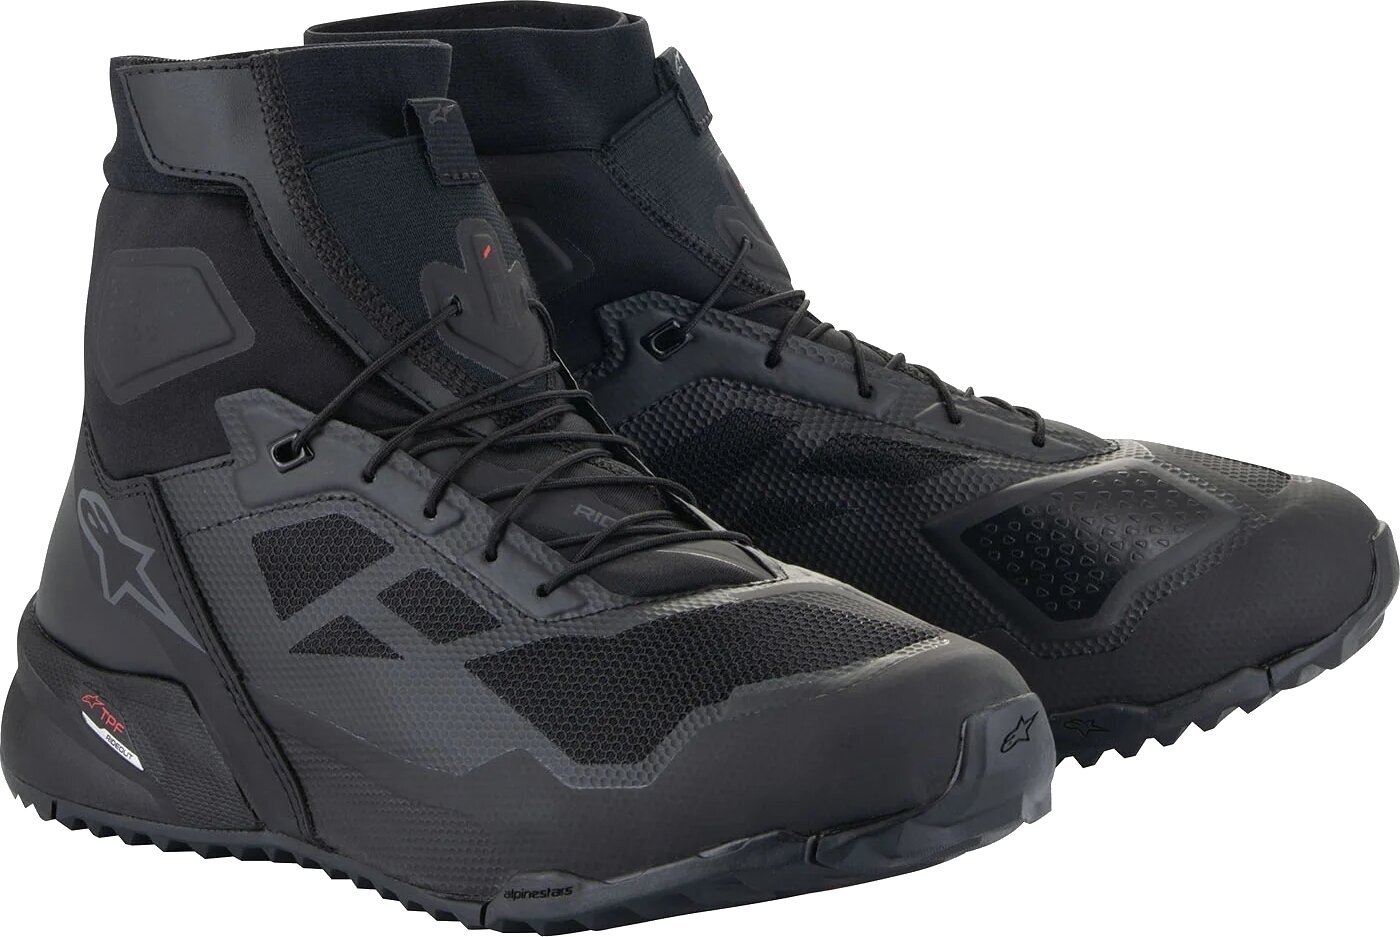 Motorcycle Boots Alpinestars CR-1 Shoes Black/Dark Grey 40,5 Motorcycle Boots